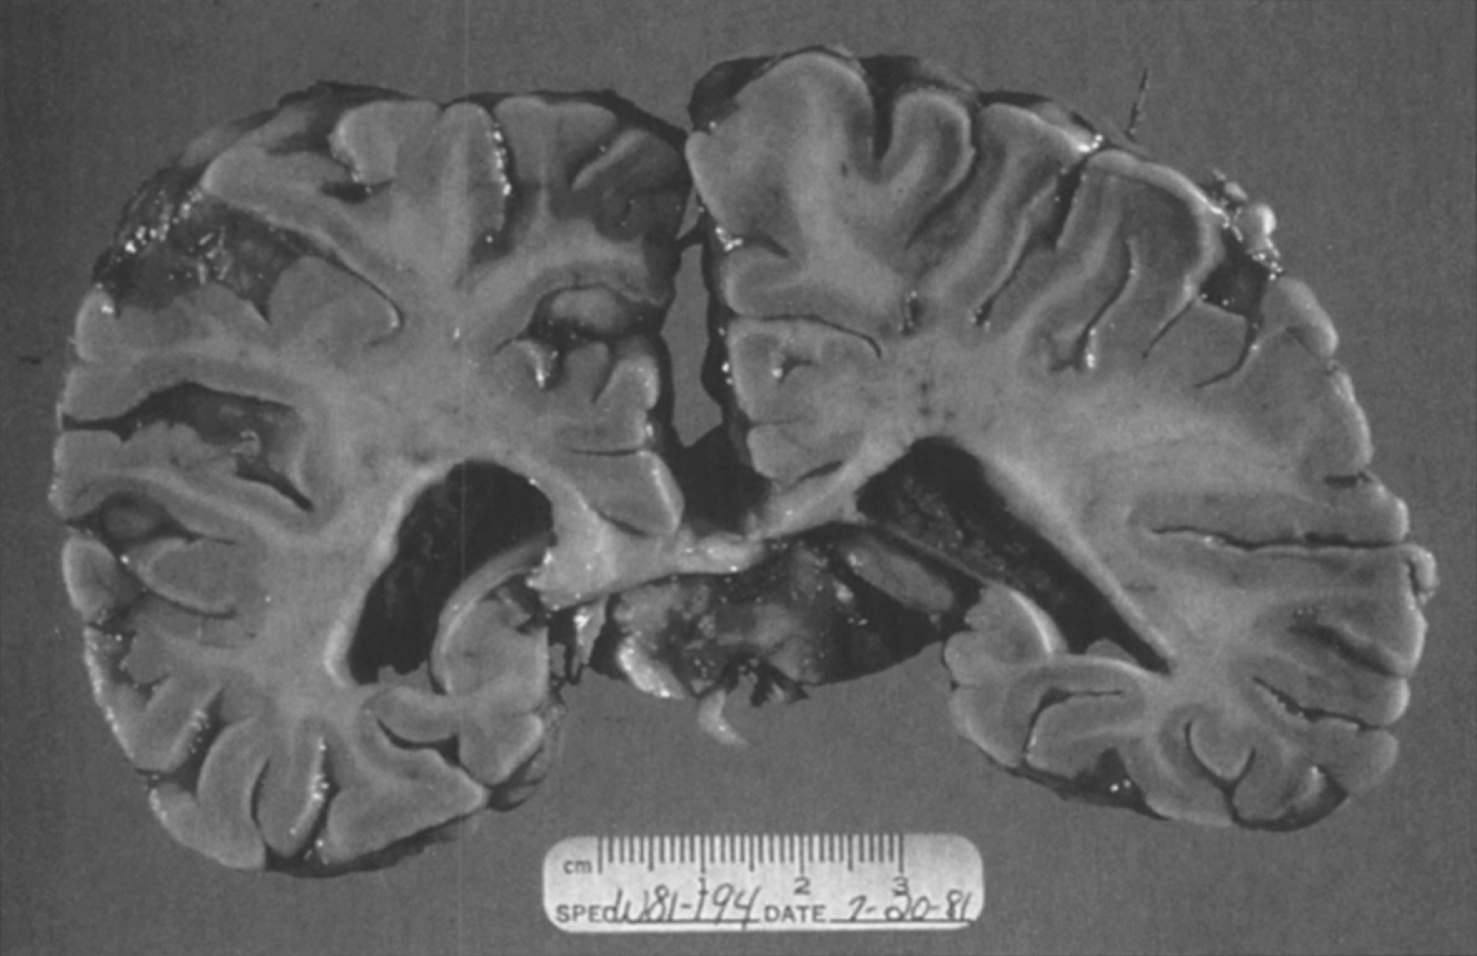 Niemann-Pick disease. A child 2 years of age. The brain is atrophic with enlargement of the ventricles.